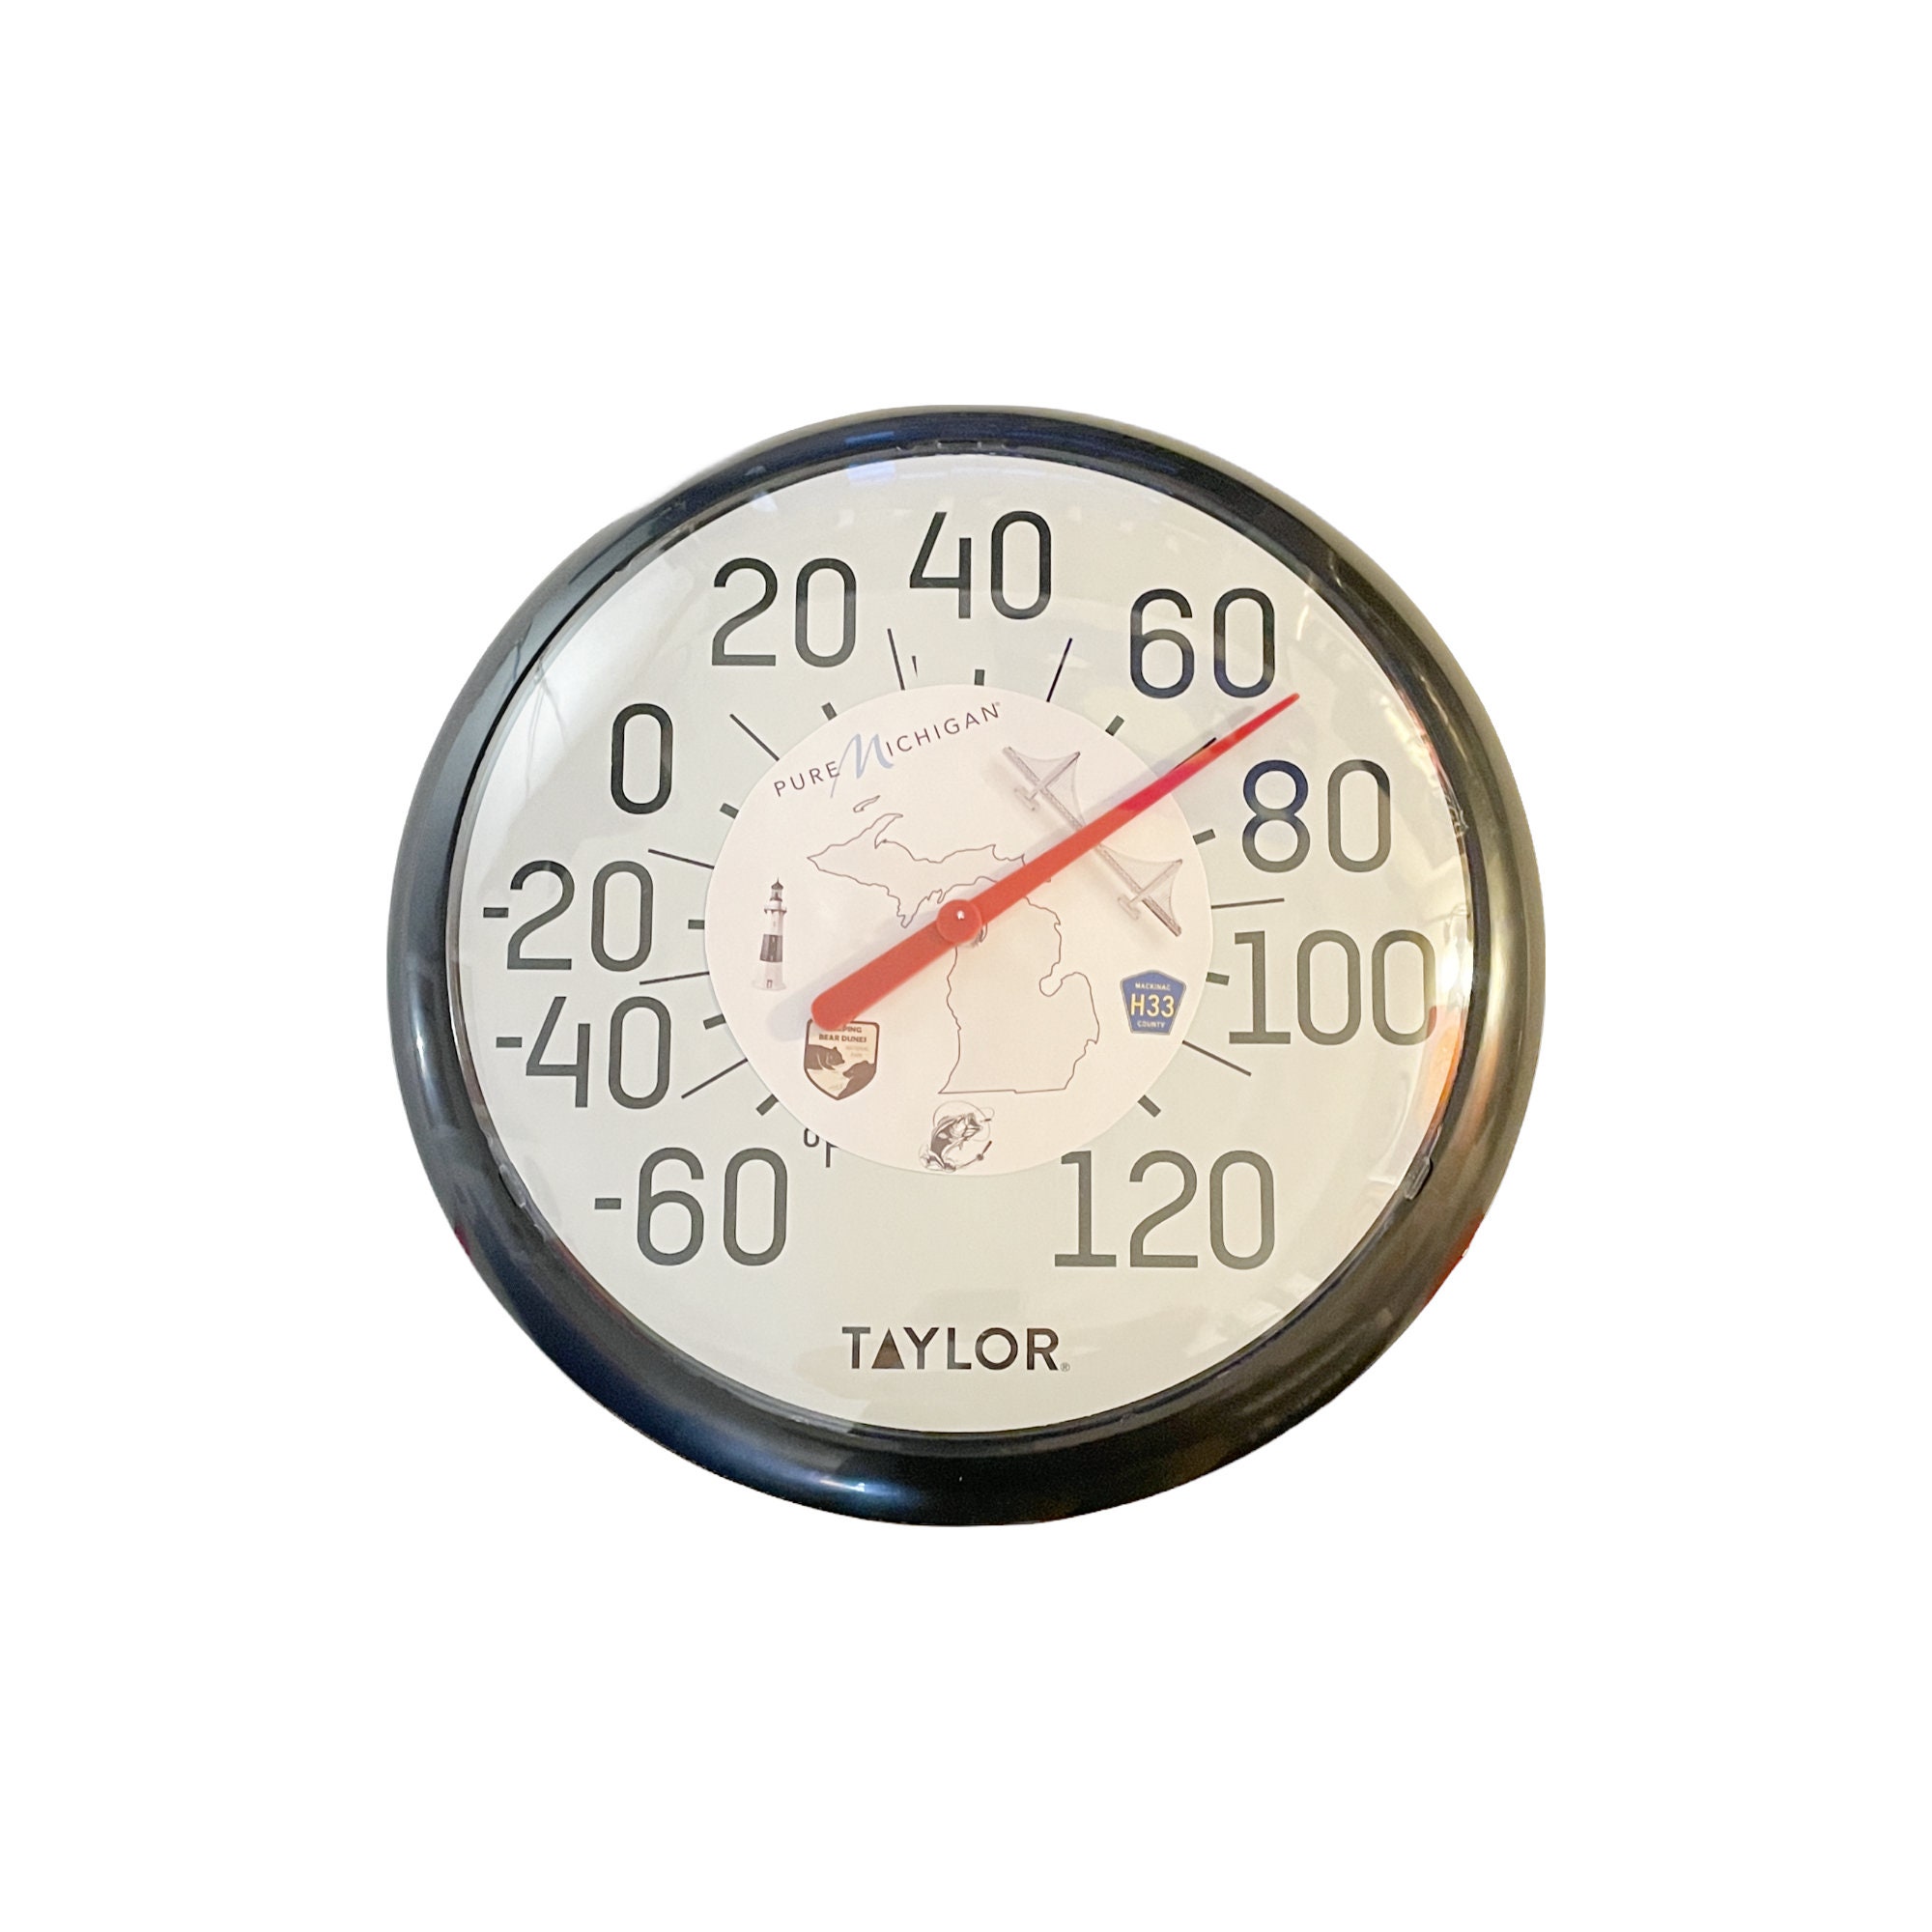 Aluminum Outdoor Thermometers - 4 W x 16 H